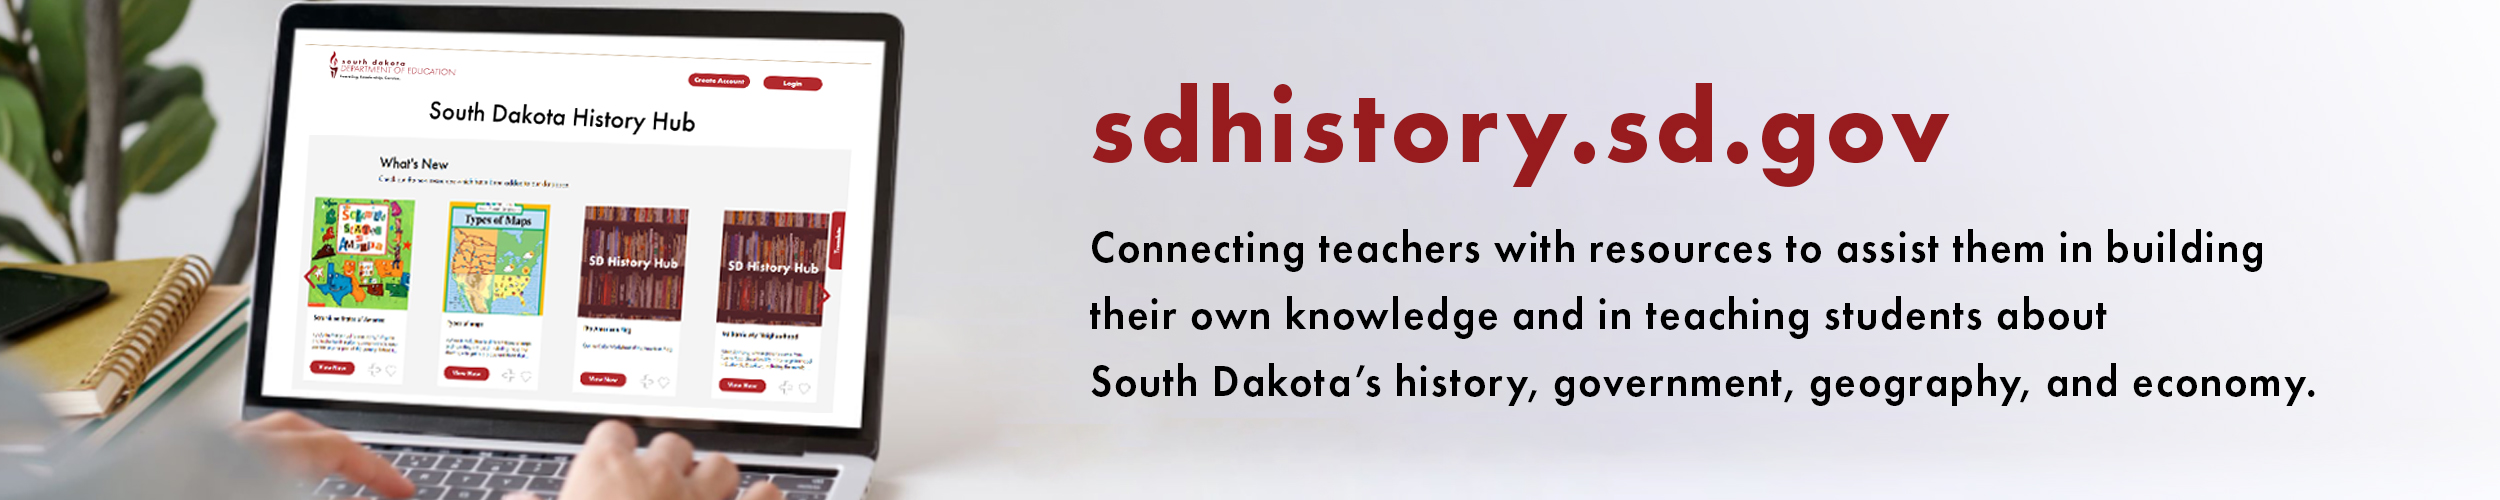 sdhistory.sd.gov. Connecting educators with South Dakota history resources. Link.